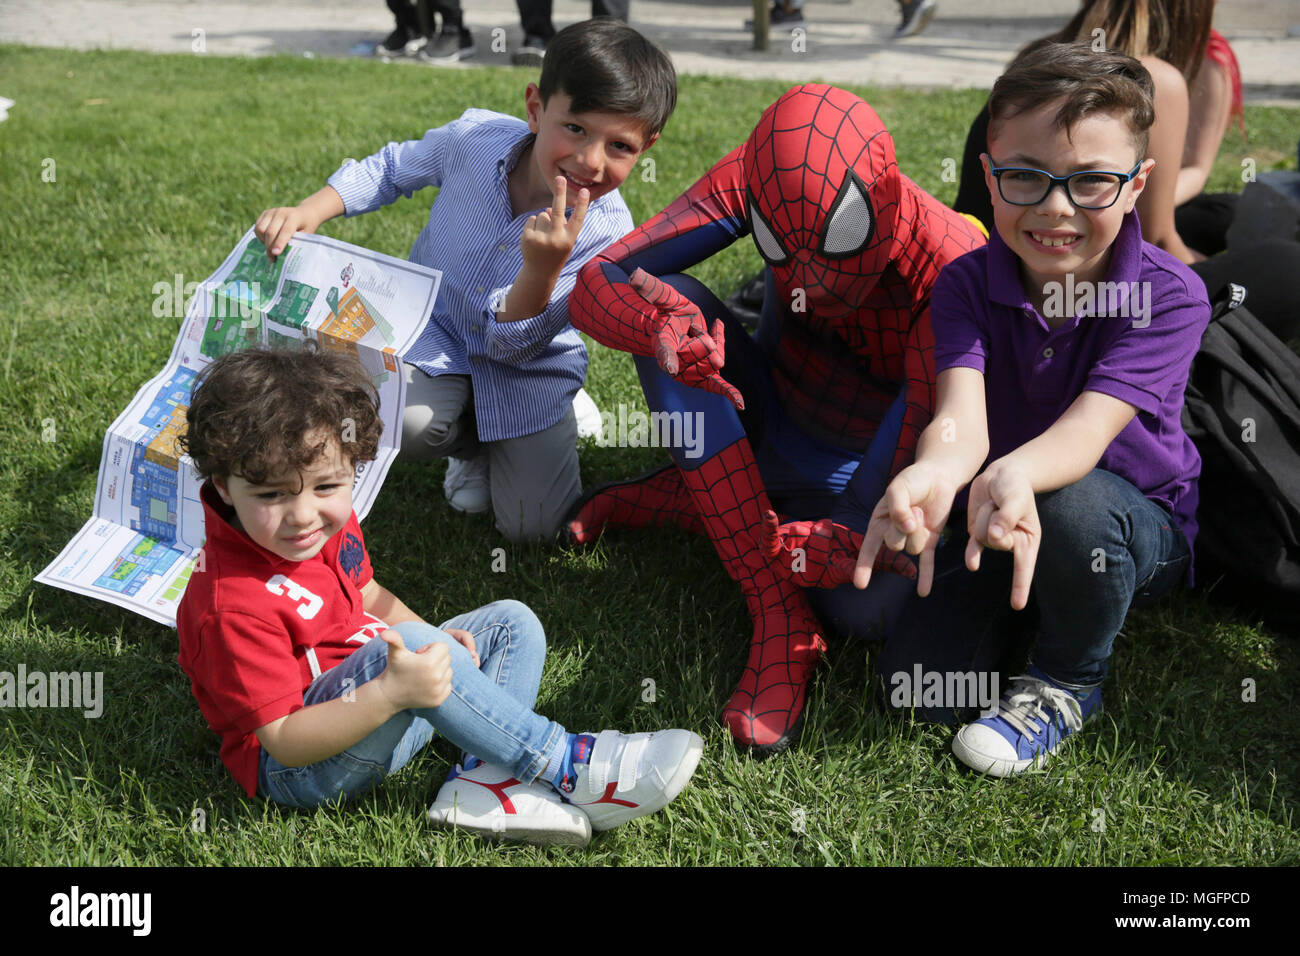 Naples, Italy, 28 April 2018. A moment of the 20th edition of Napoli Comicon to be held until May 1st at the Mostra d'Oltremare in Naples. 28/04/2018 - Naples, Italy Credit: Independent Photo Agency Srl/Alamy Live News Stock Photo